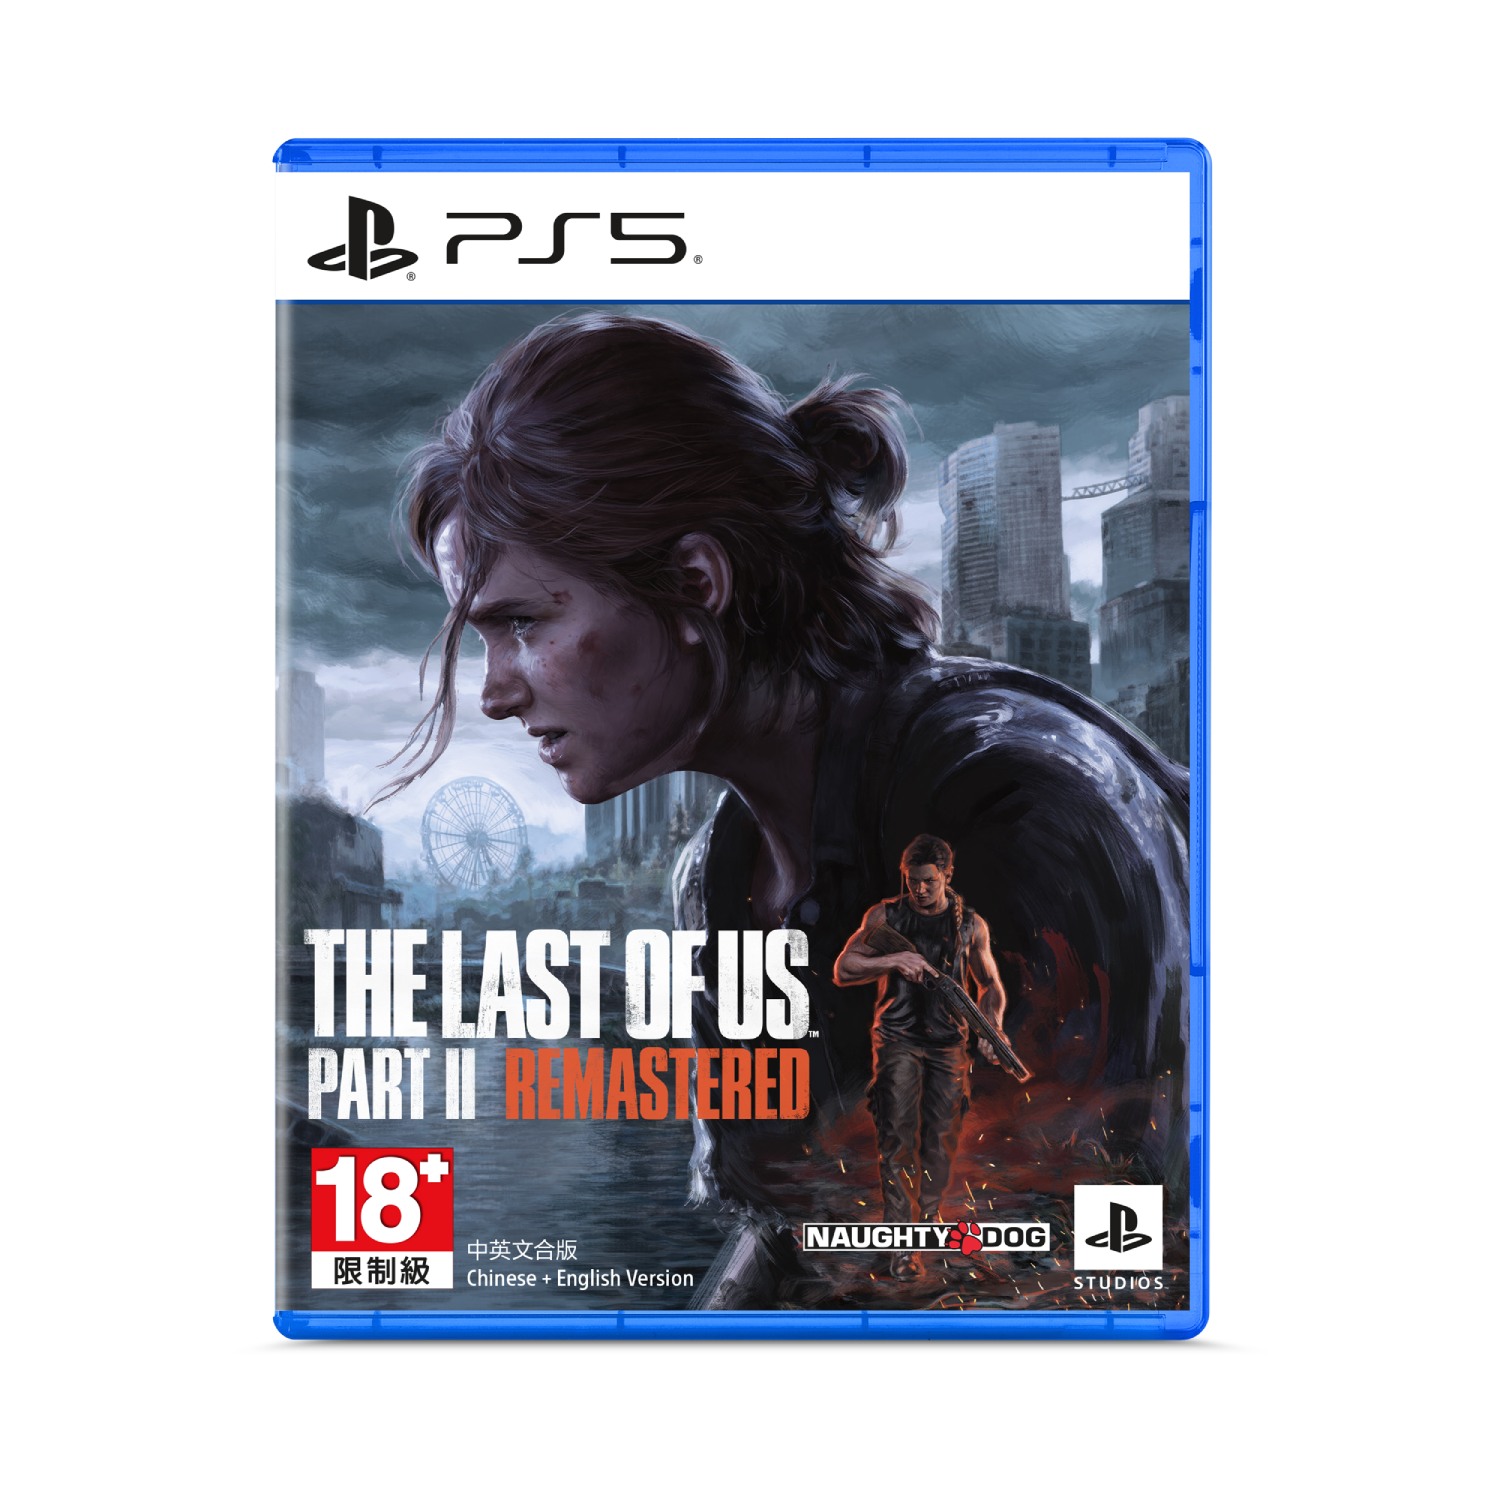 PlayStation®5 Software “The Last of Us Part II Remastered” (ECAS-00056)